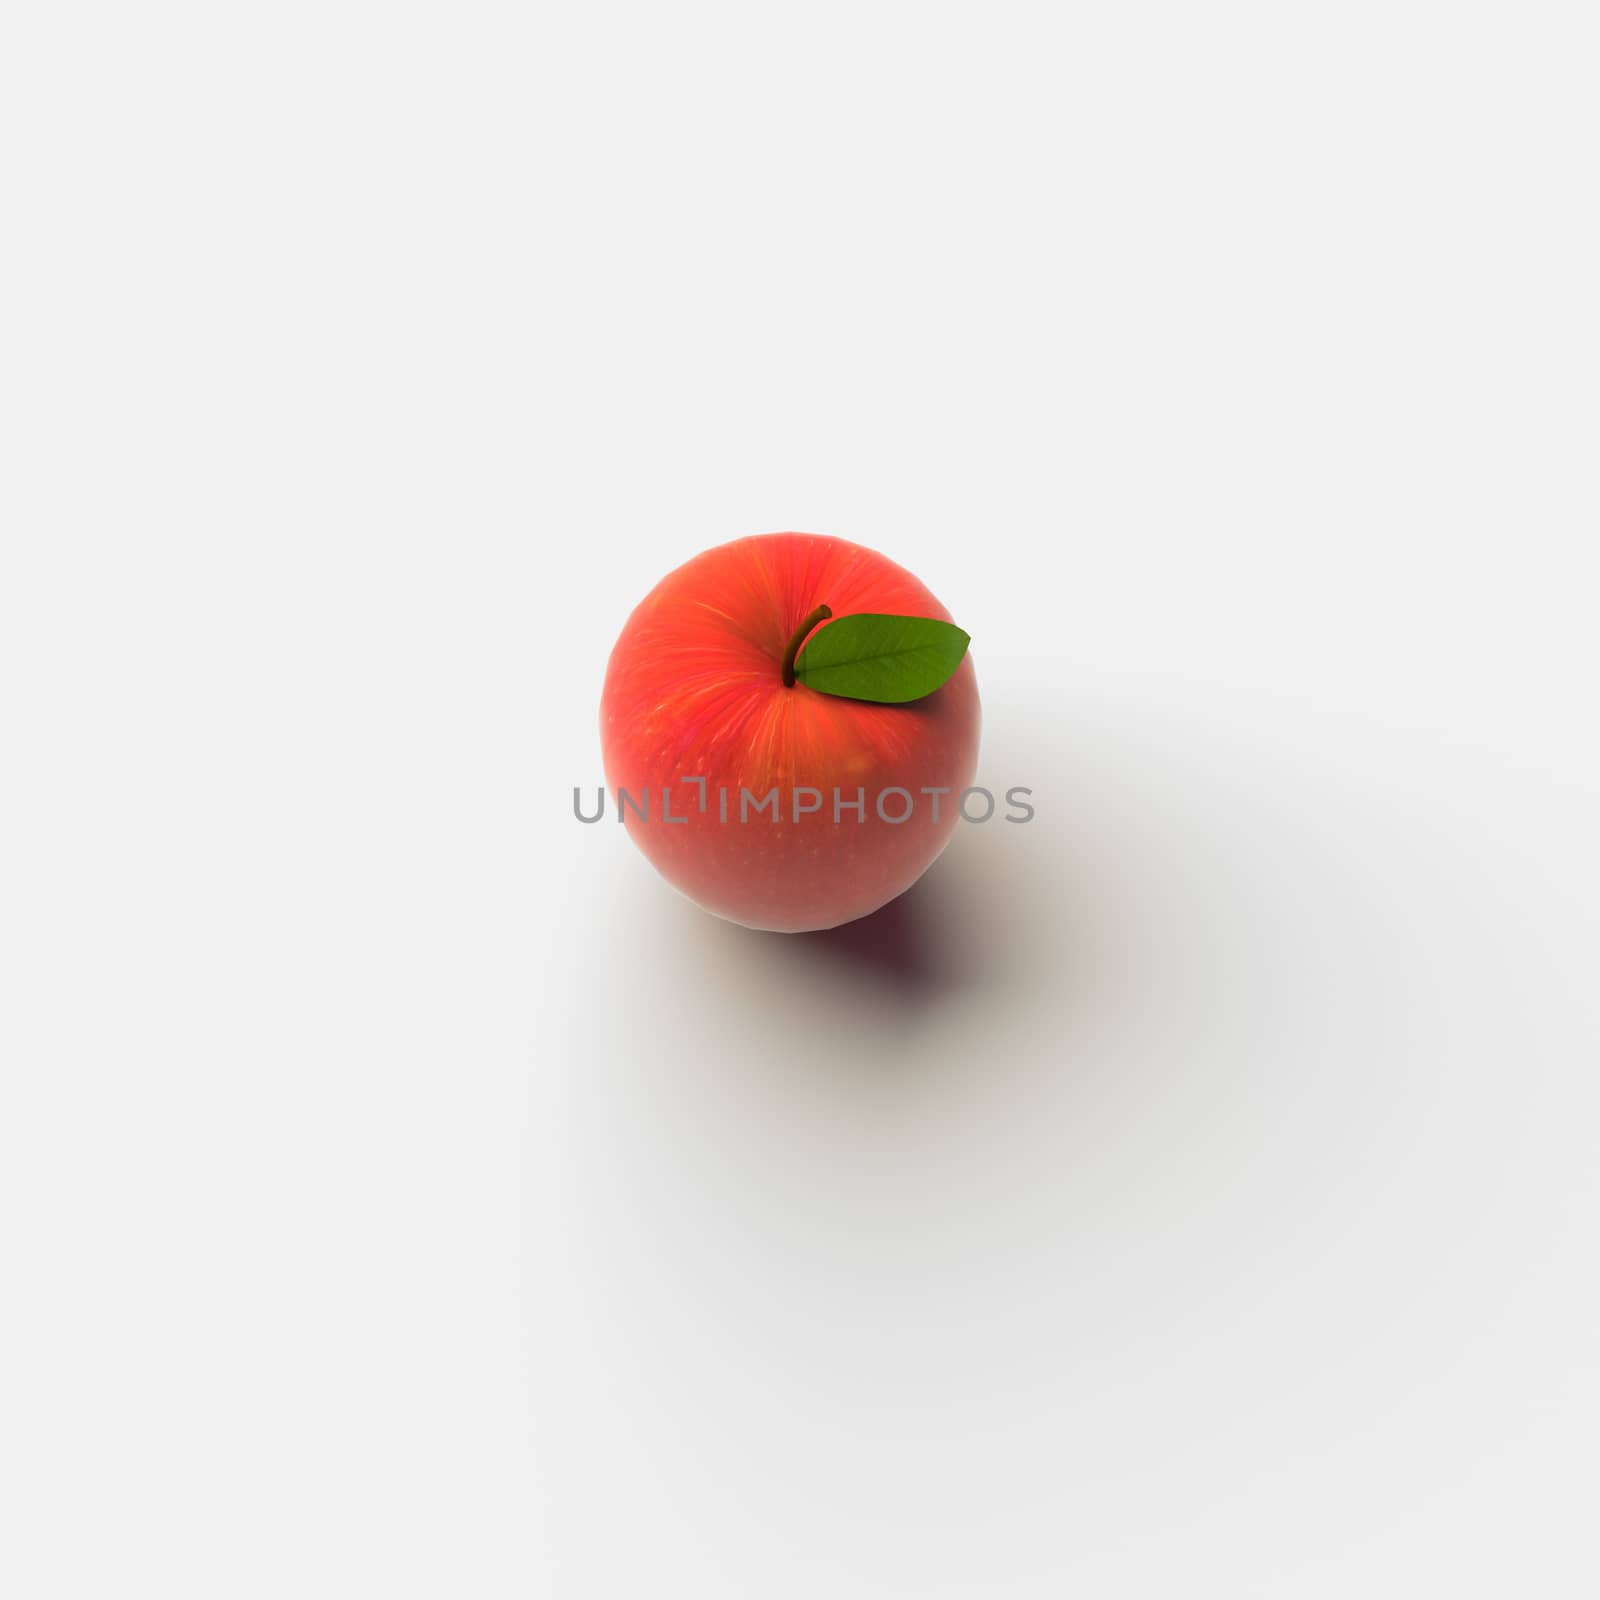 3D RENDERING OF AN APPLE ON PLAIN BACKGROUND